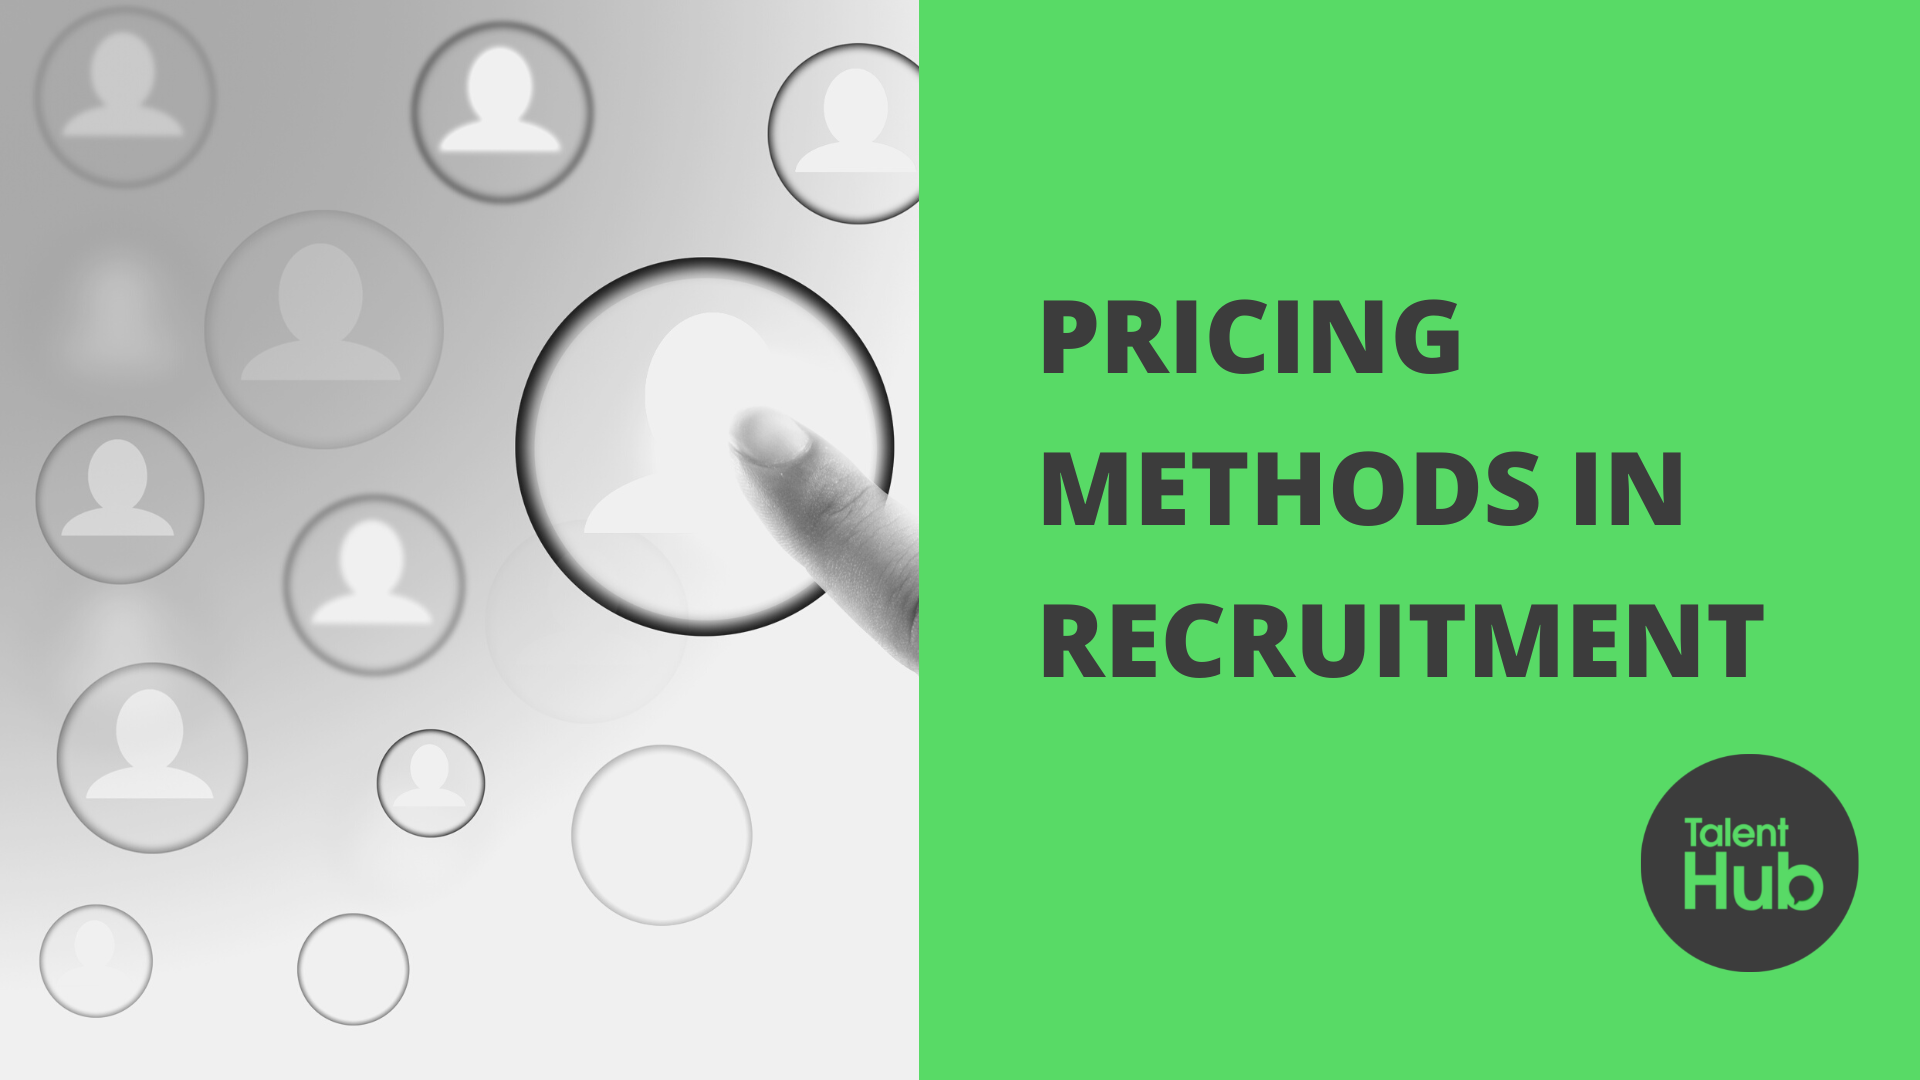 What Are The Three Pricing Models In Recruitment?